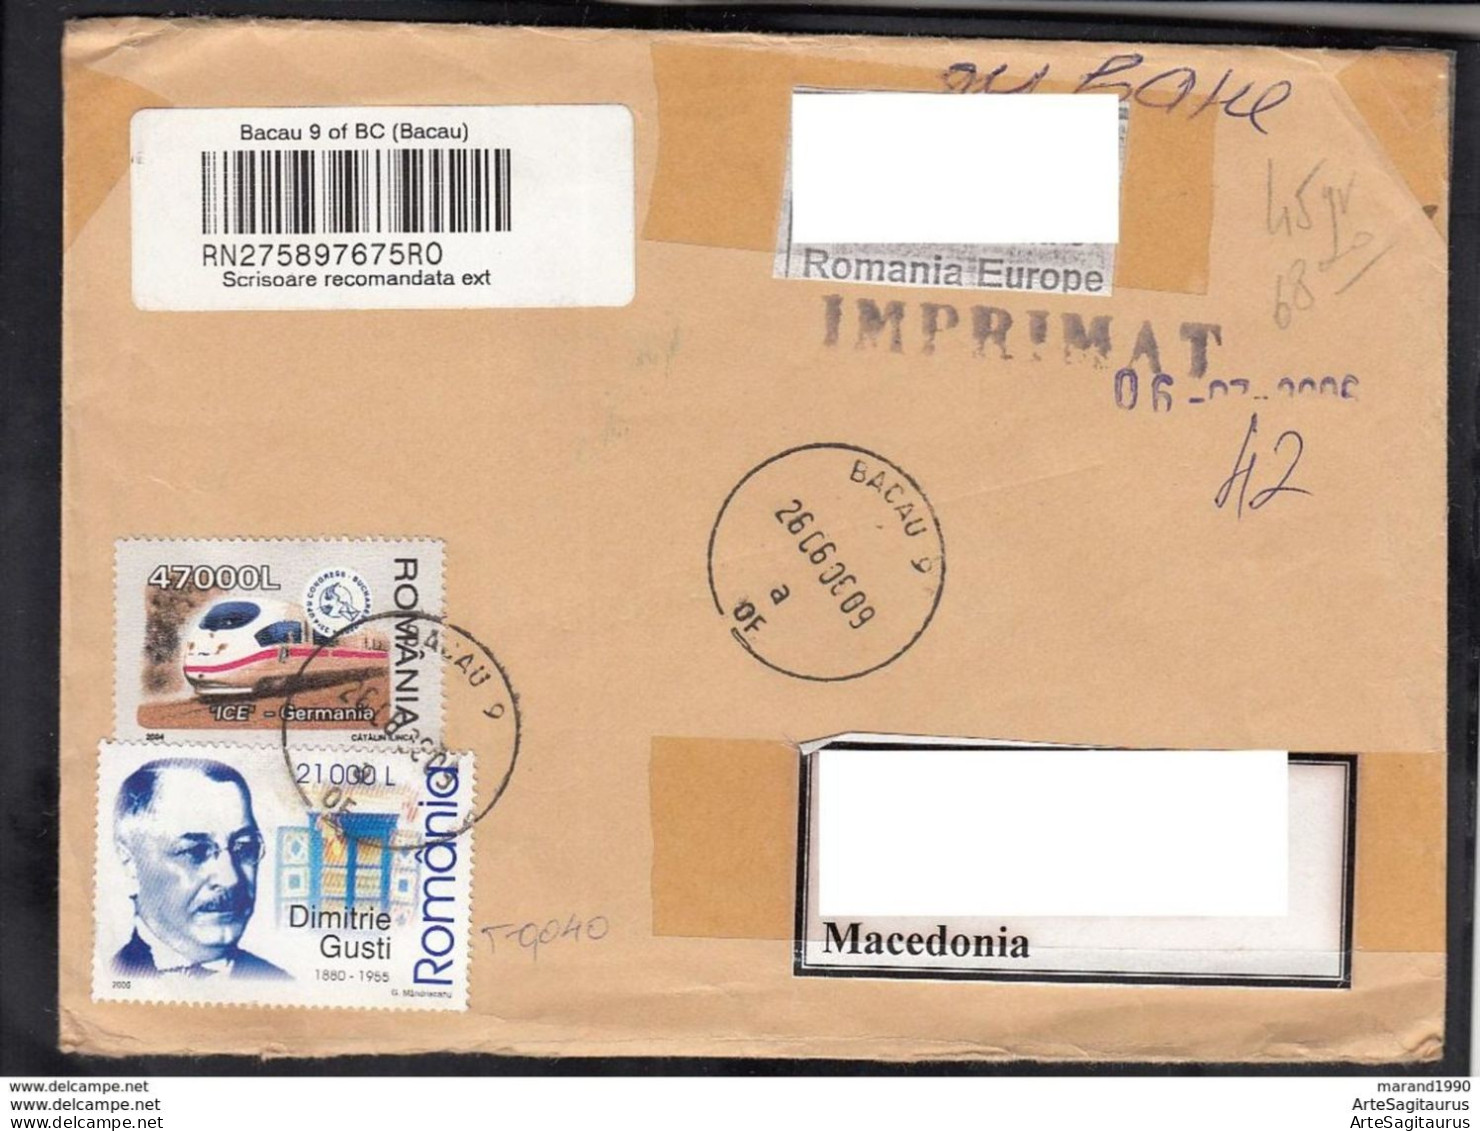 ROMANIA, R-COVER, TRAINS, DIMITRIE GUSTI, REPUBLIC OF MACEDONIA   (008) - Lettres & Documents